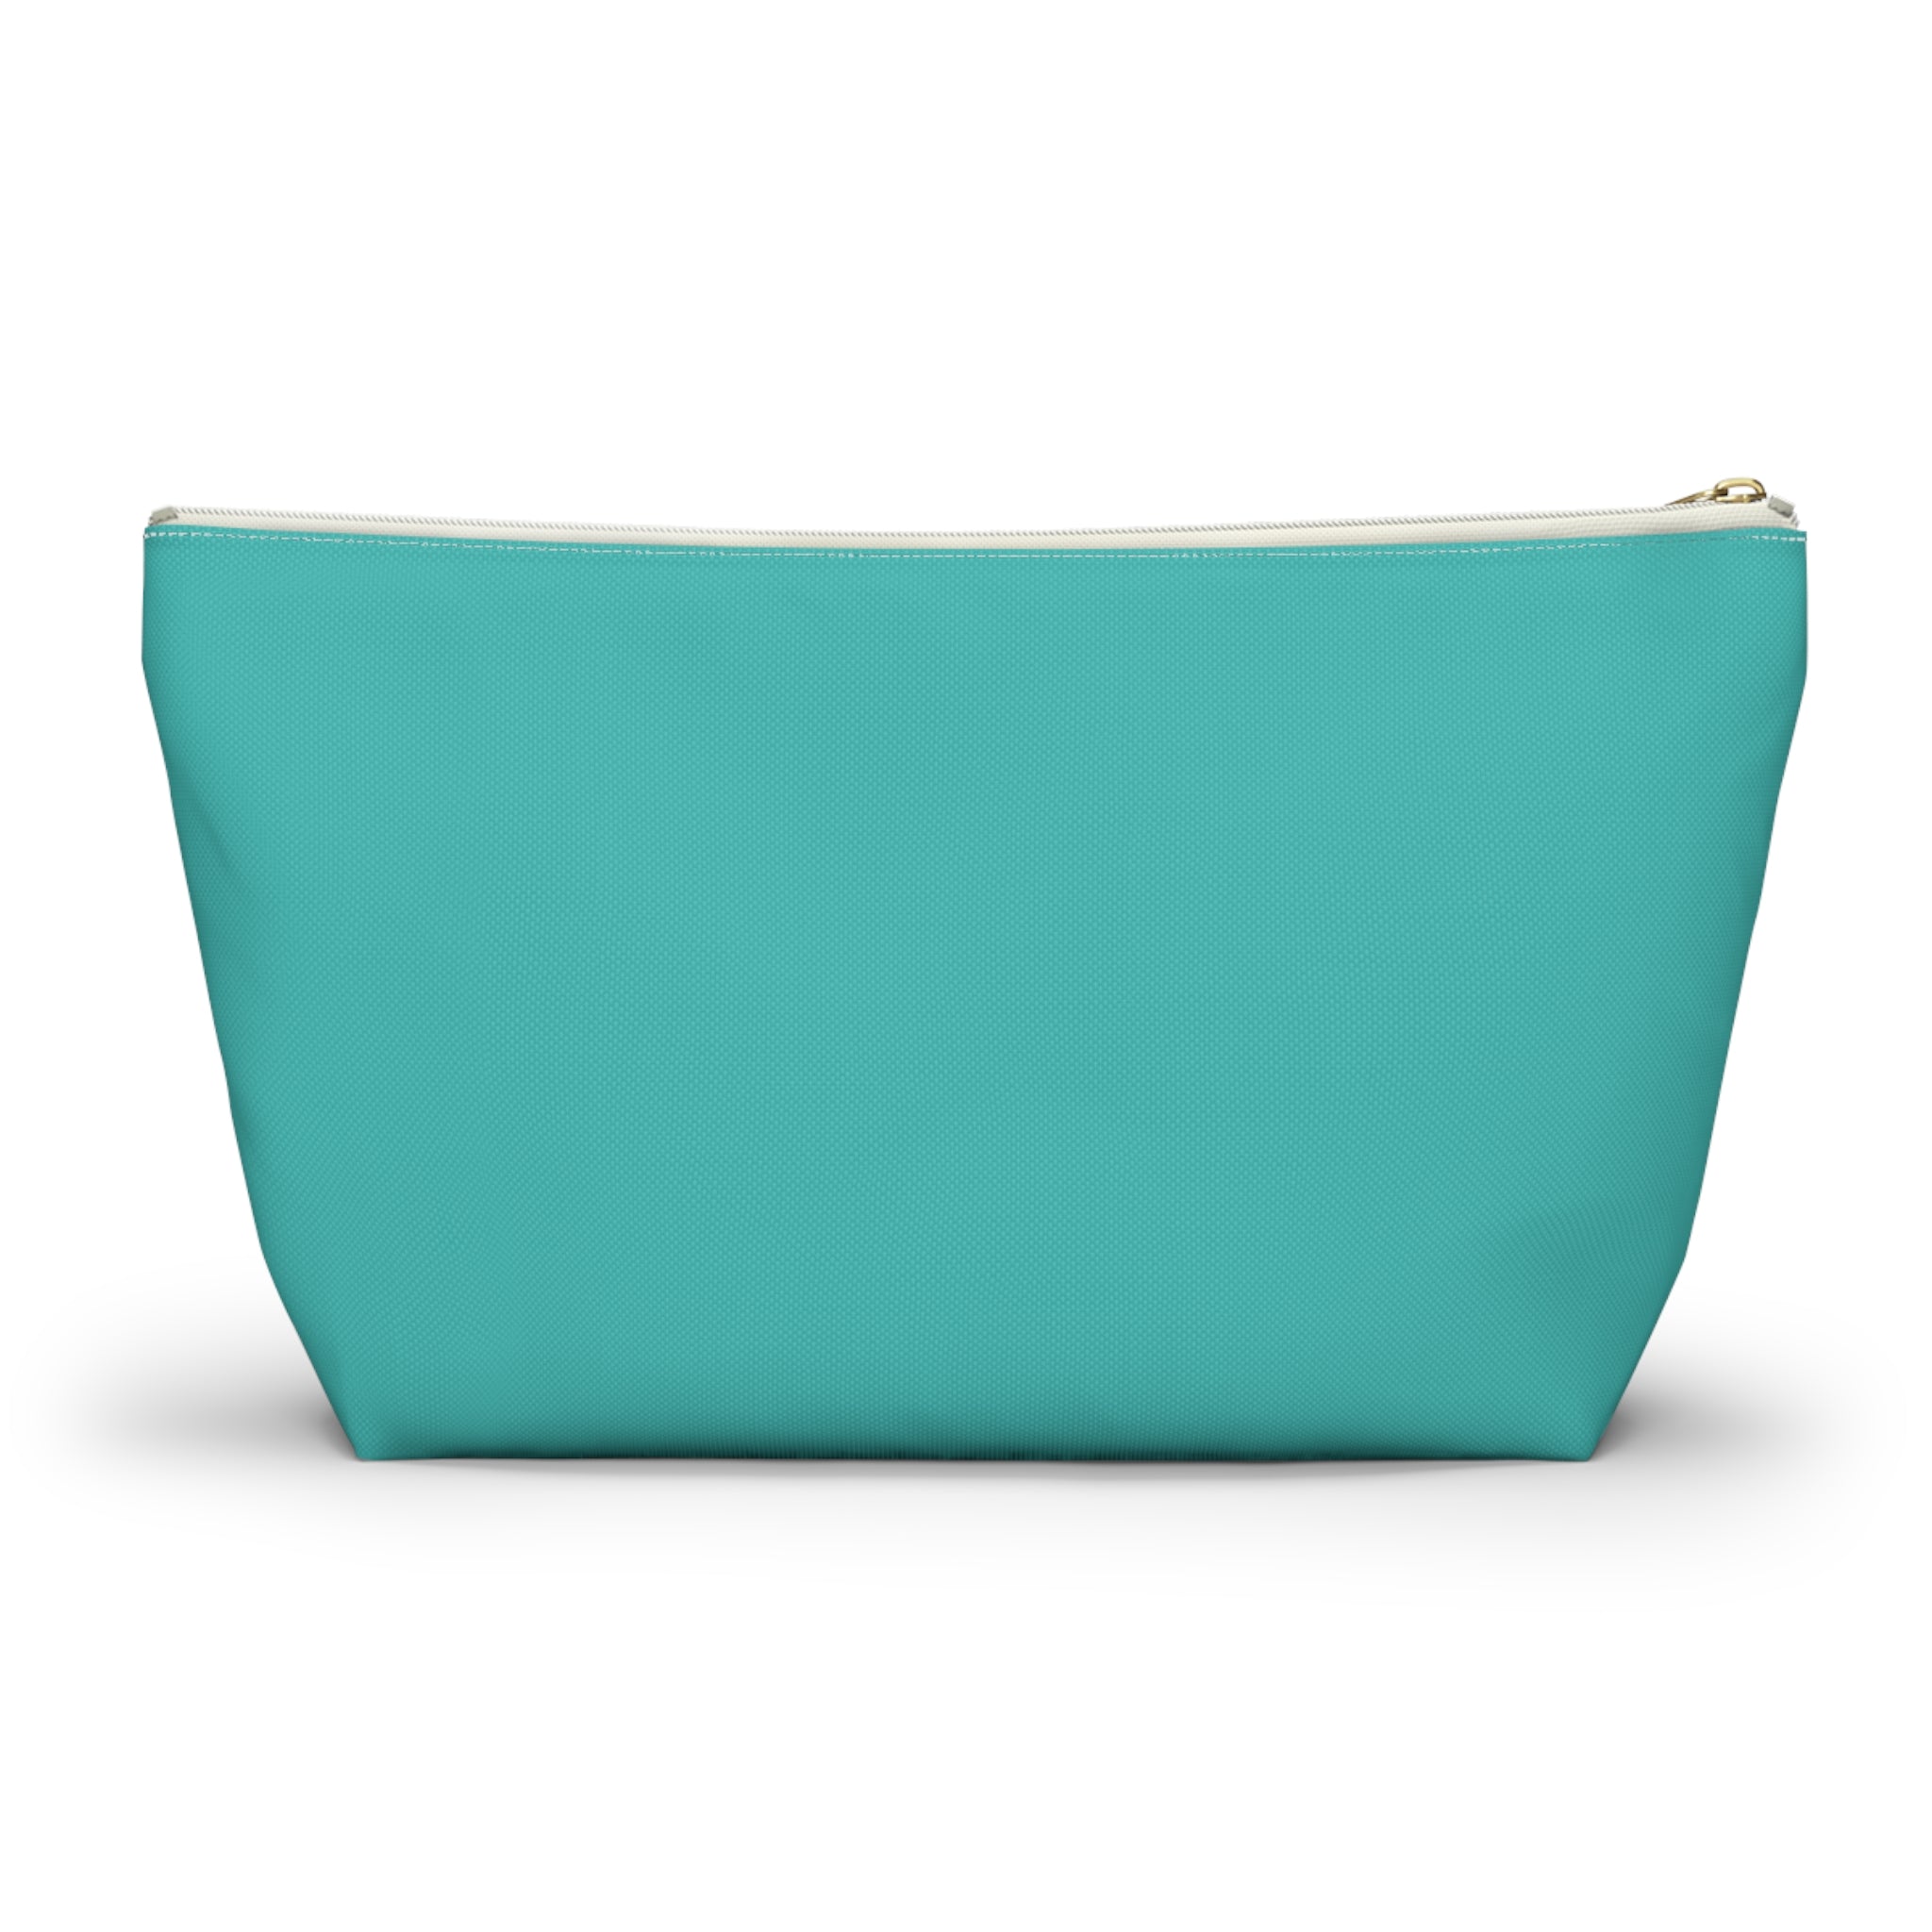 Chargers & stuff Pouch (Teal)